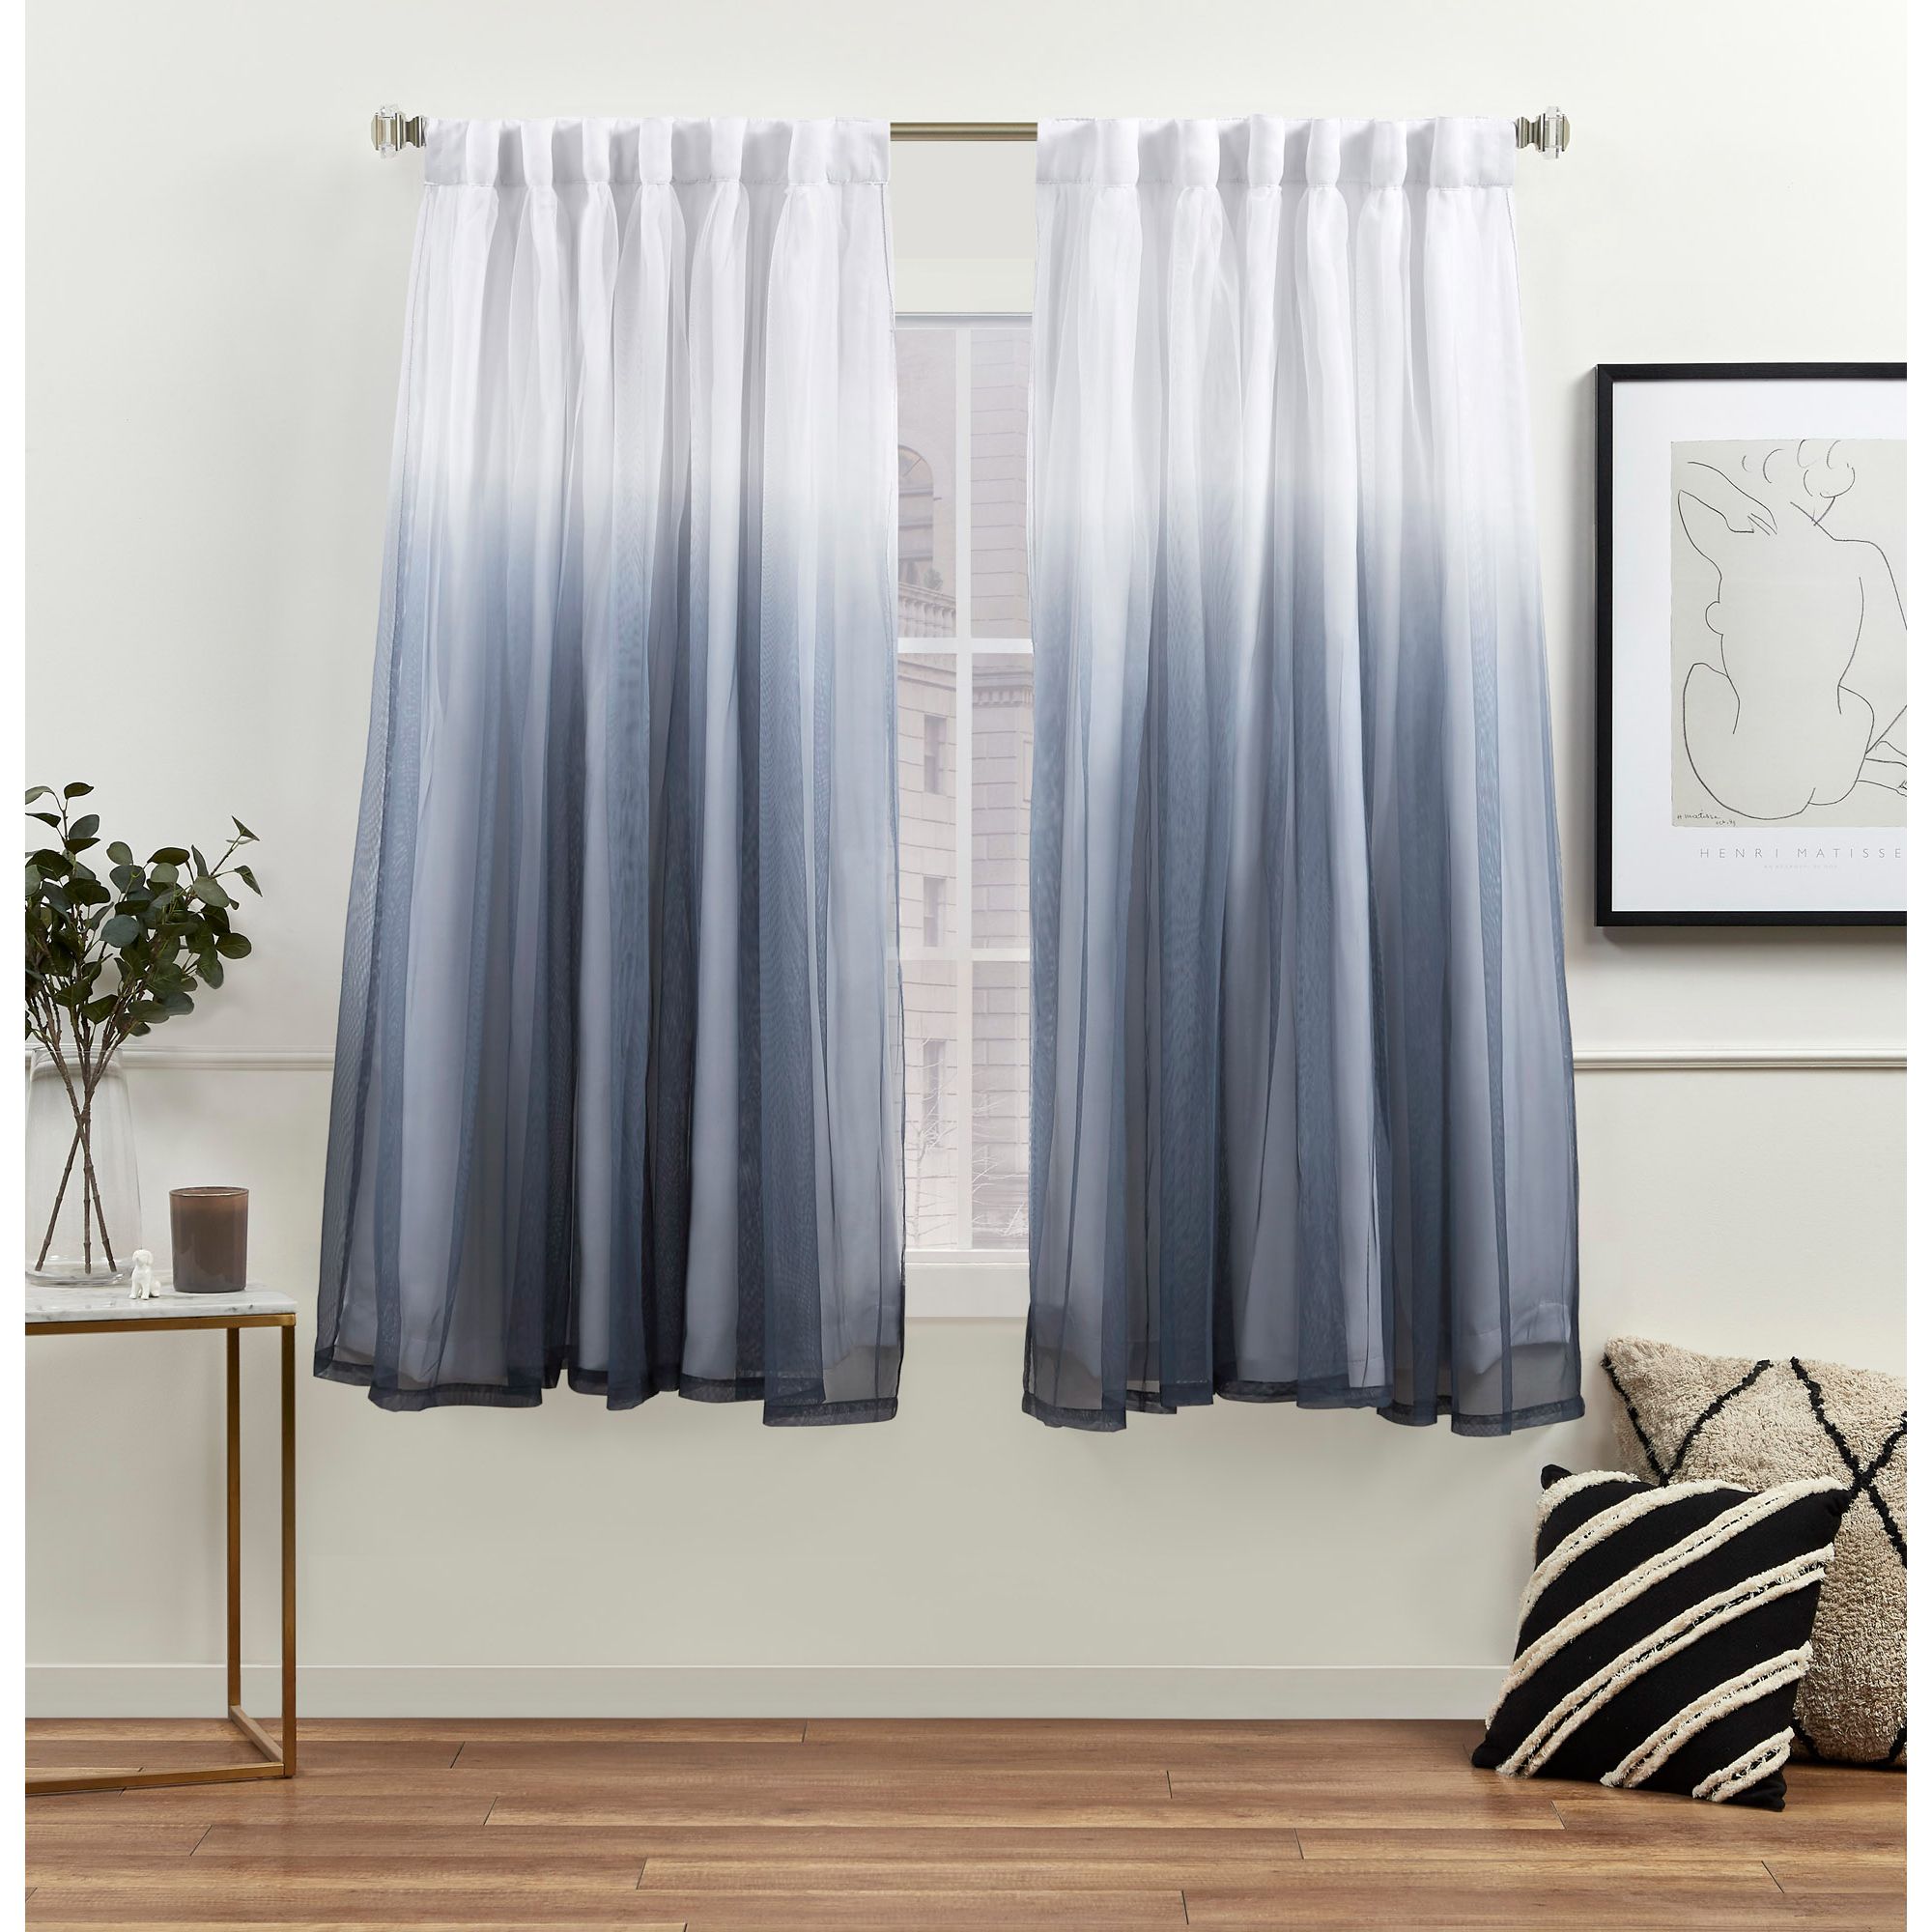 Argos Polyester Cotton Home Blackout Thermal Curtains 